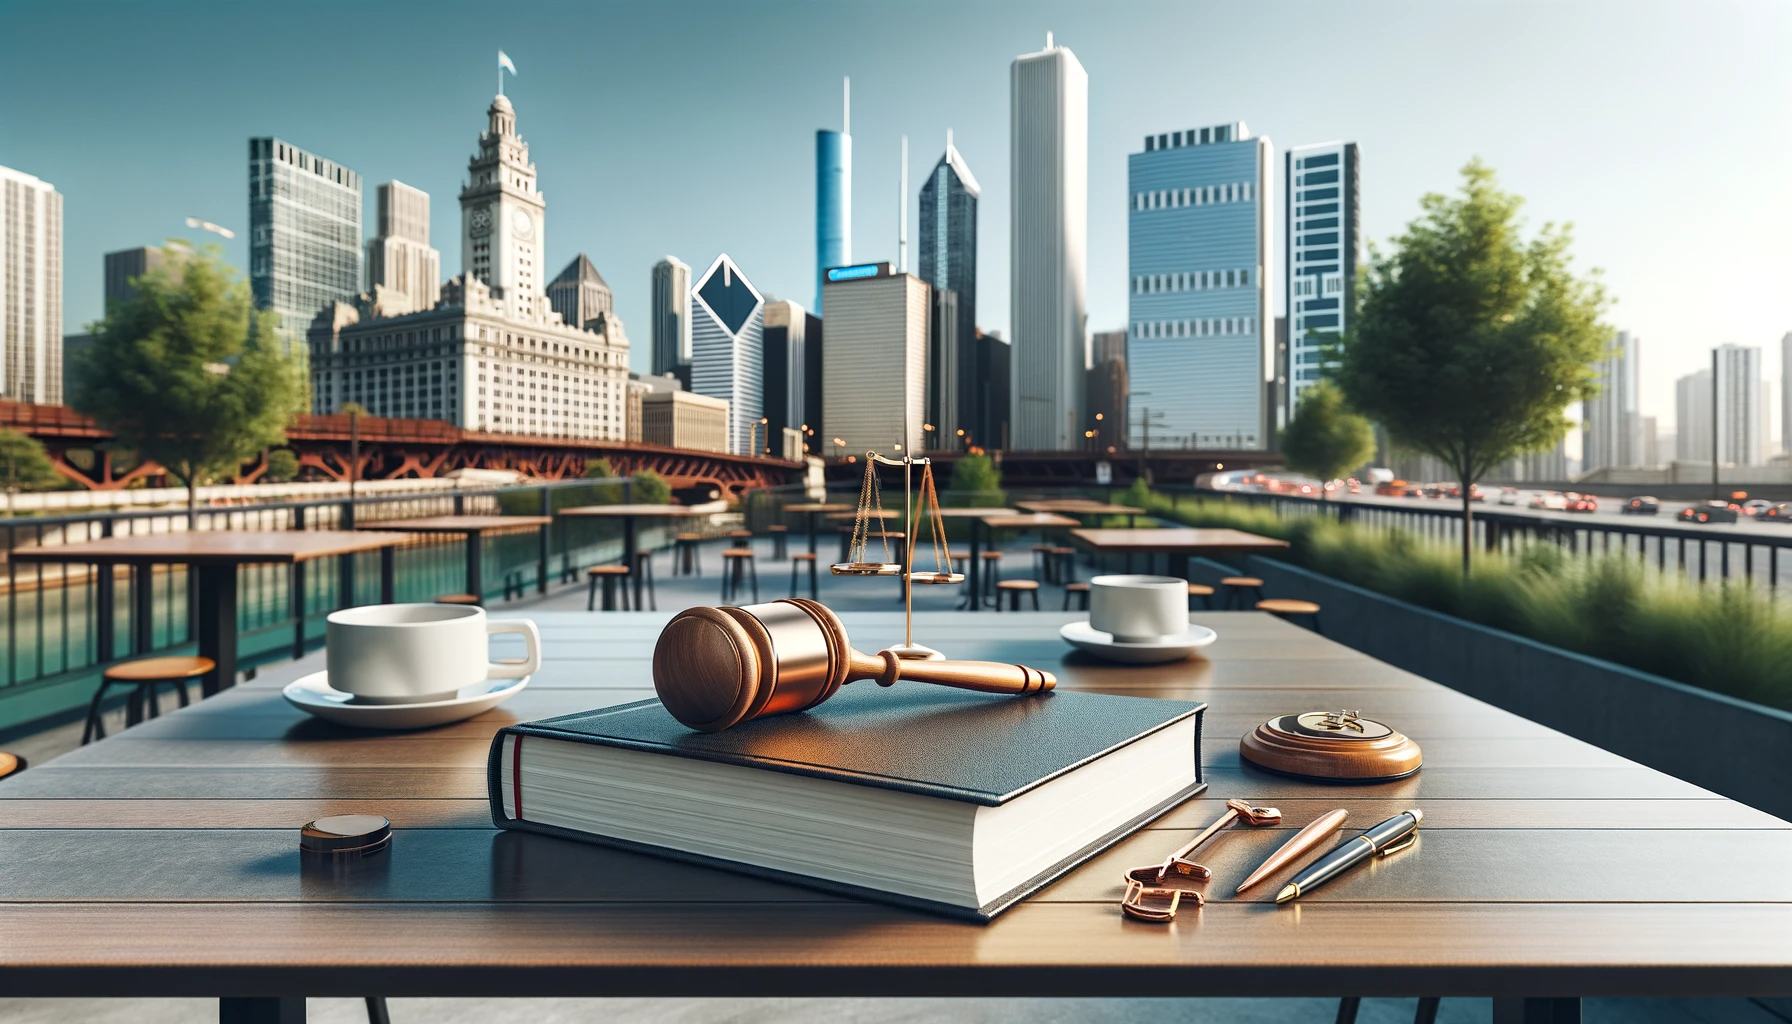 Legal Aspects of Property Management in Chicago